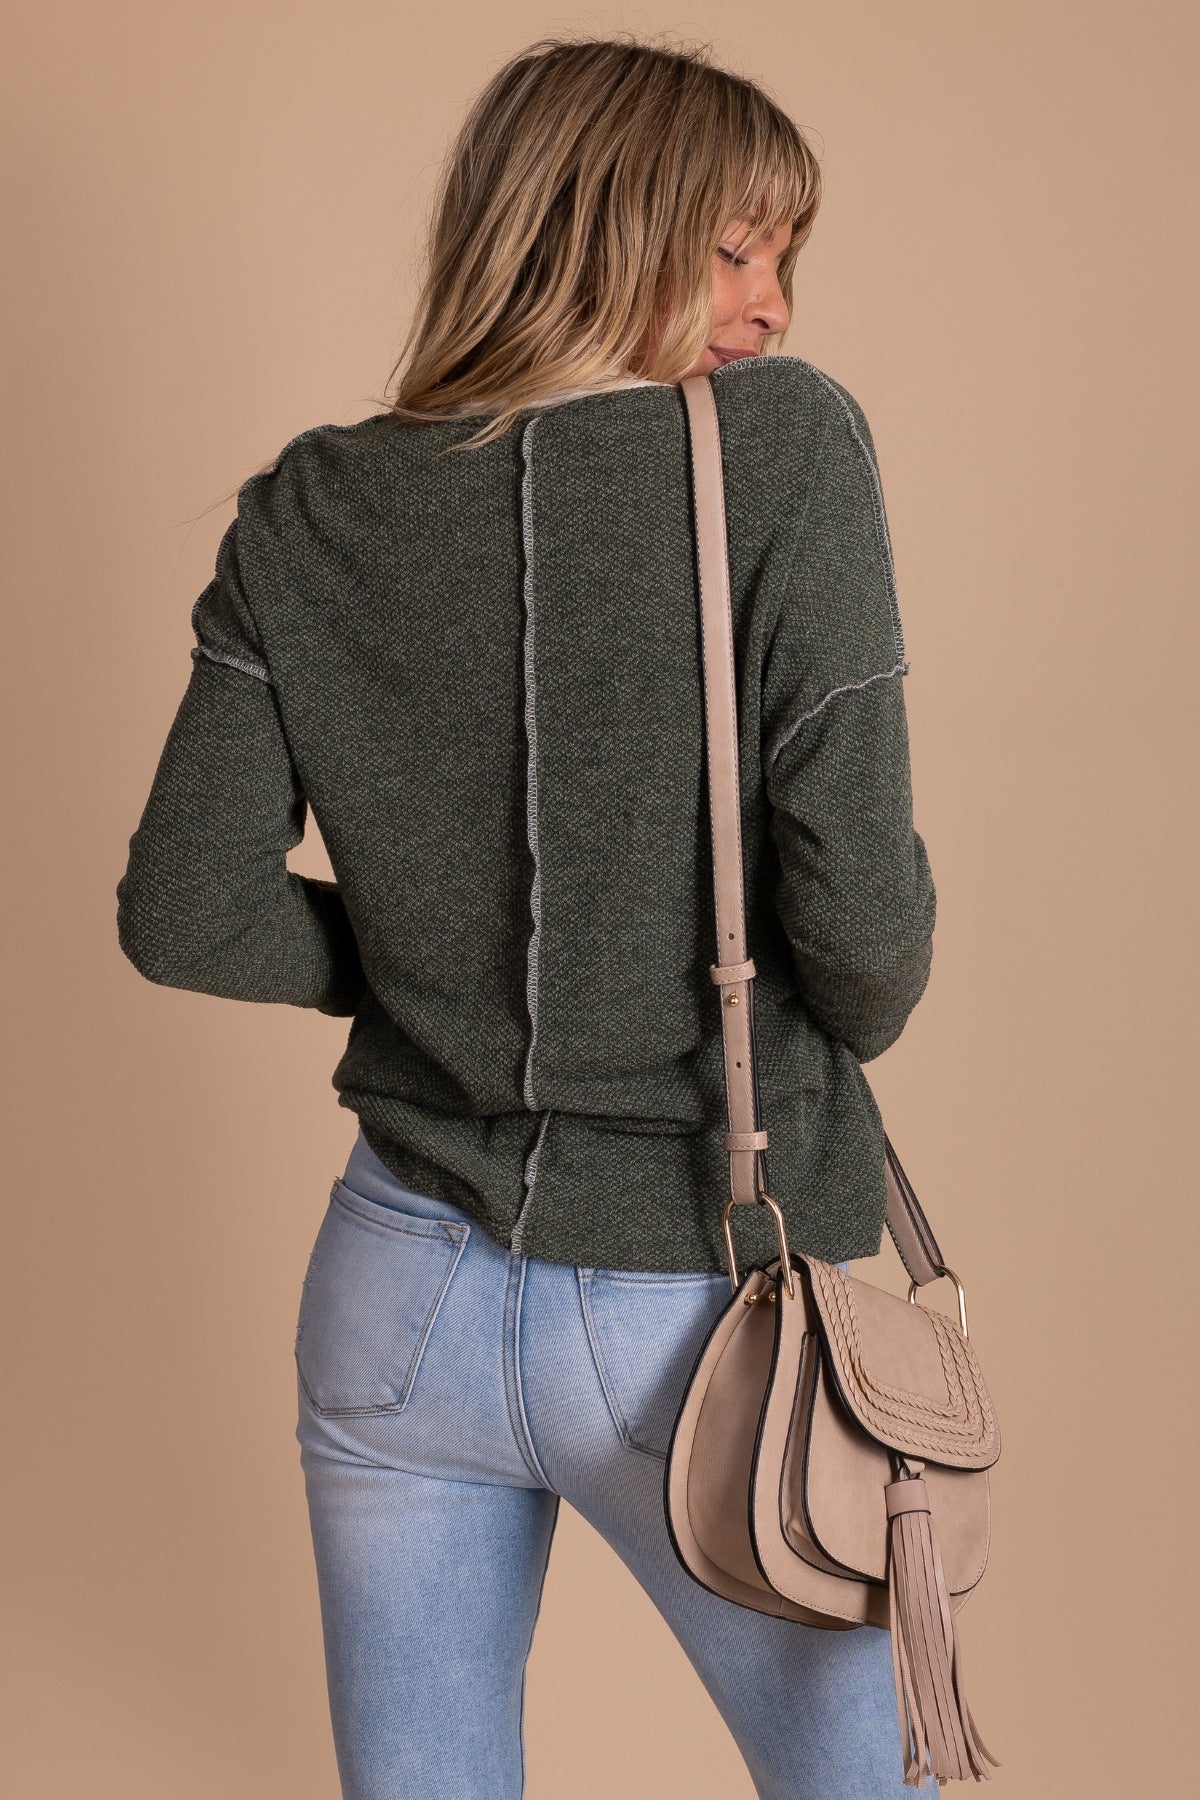 Trendy Knit Sweater Top in Olive Green for Fall